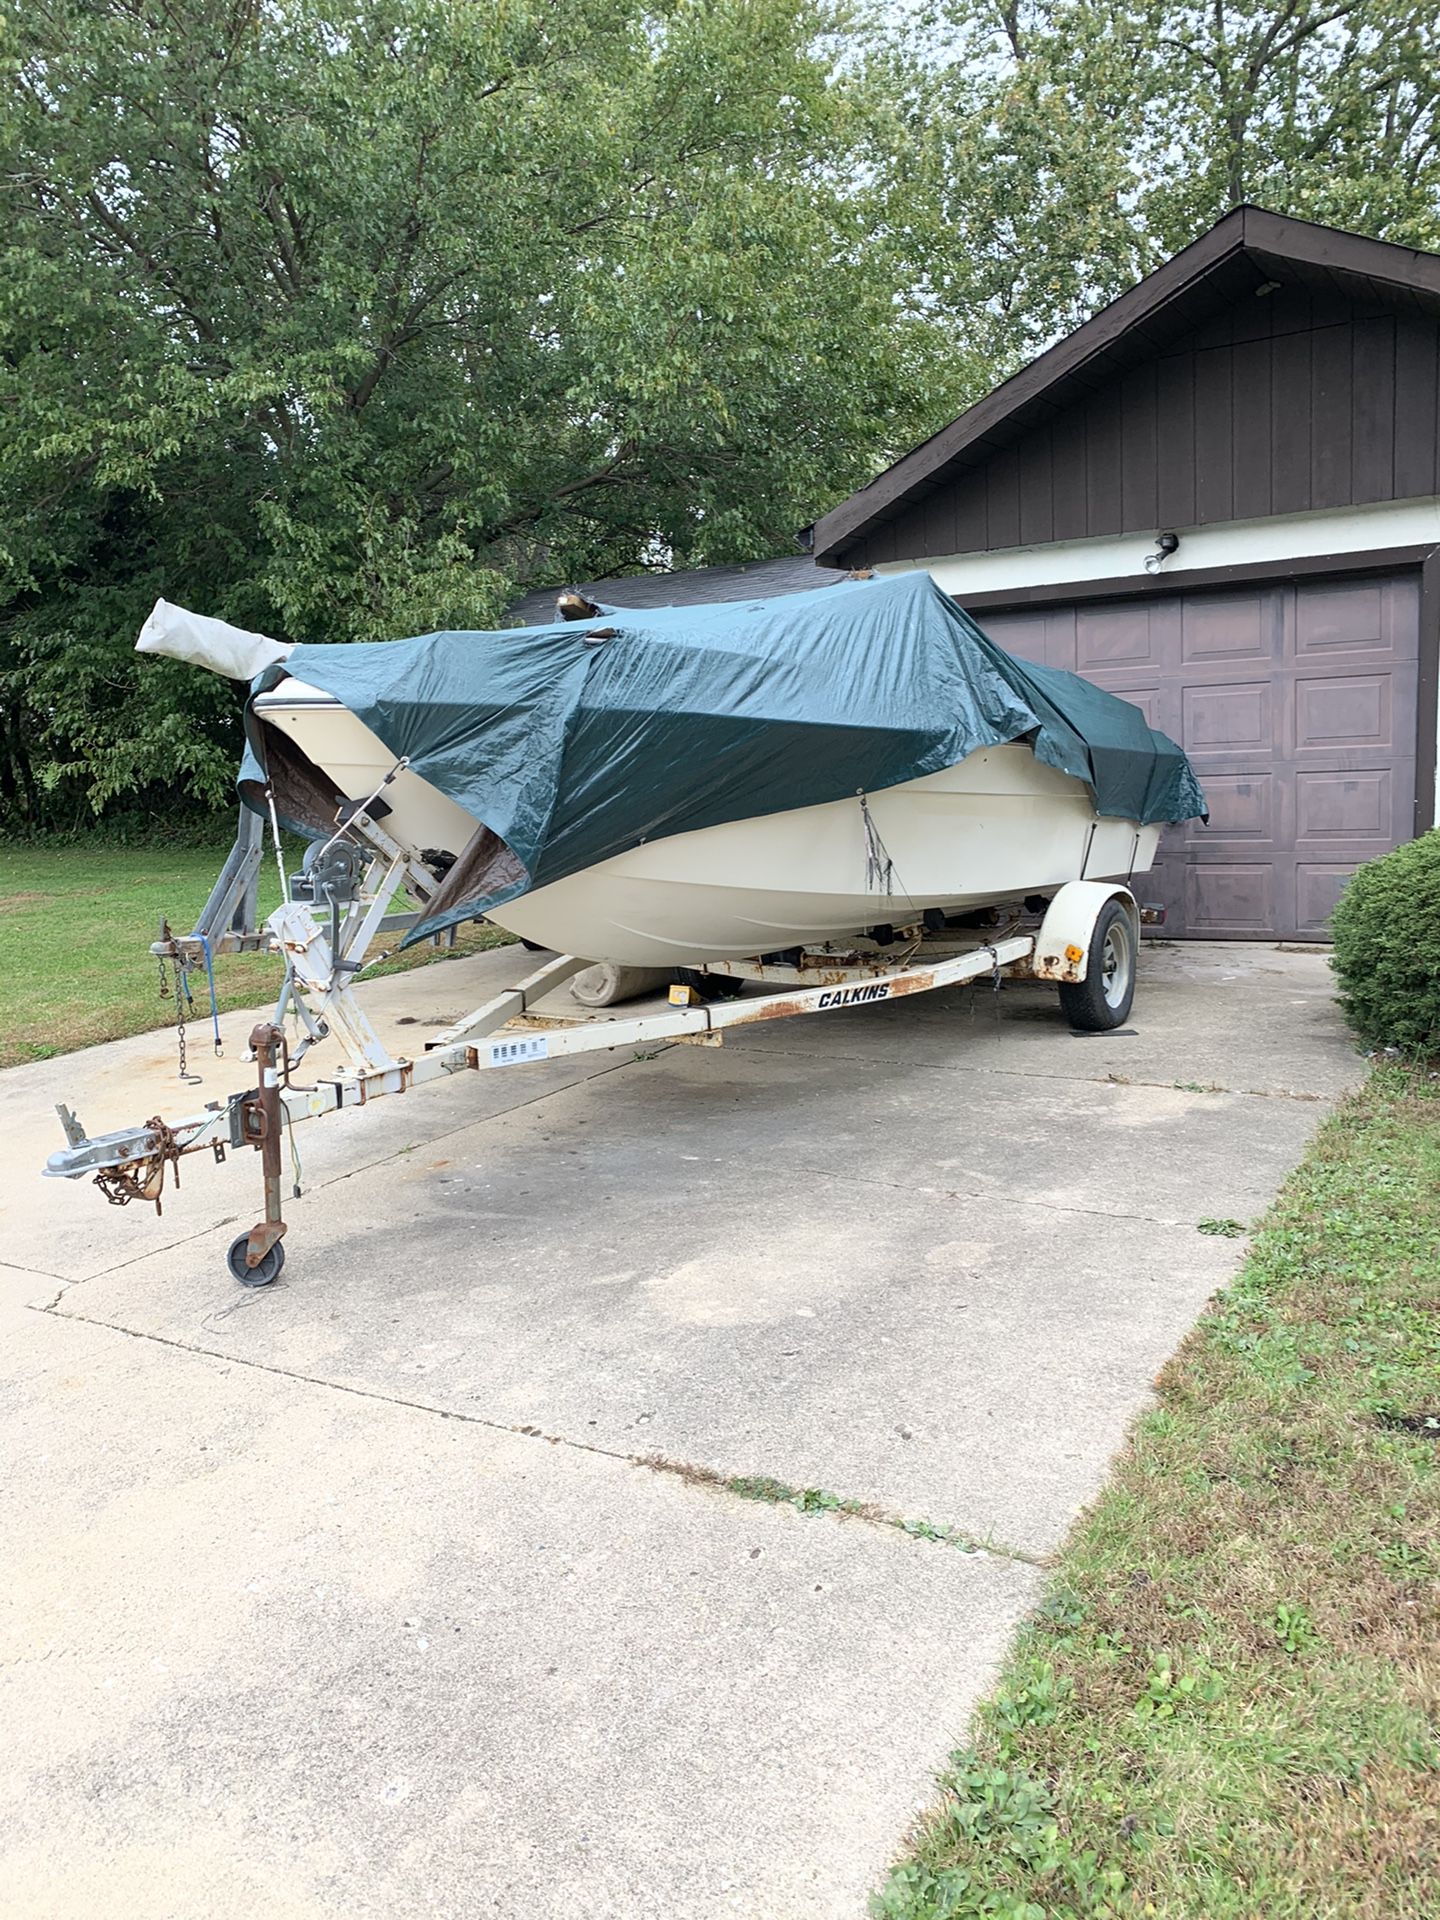 Free boat! Must pic up this week! If you see this post, it’s available.